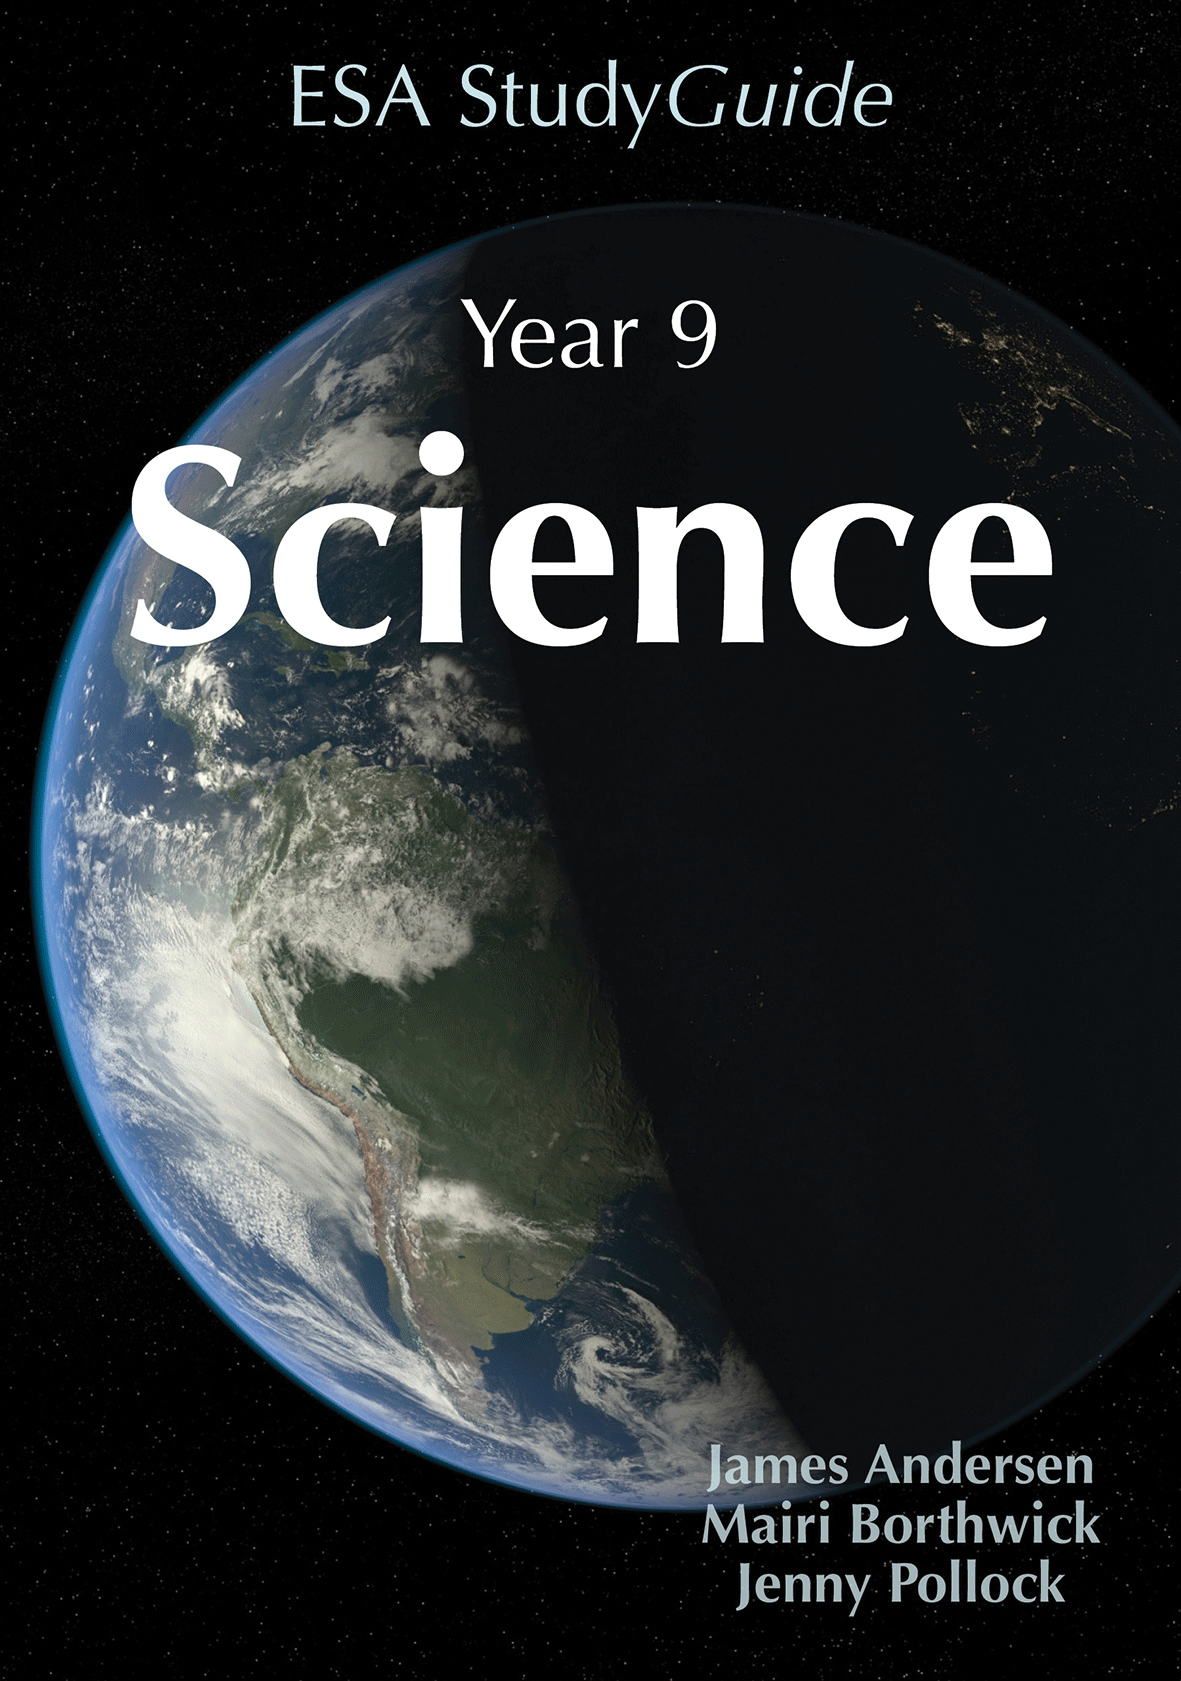 Year 9 Science ESA Study Guide